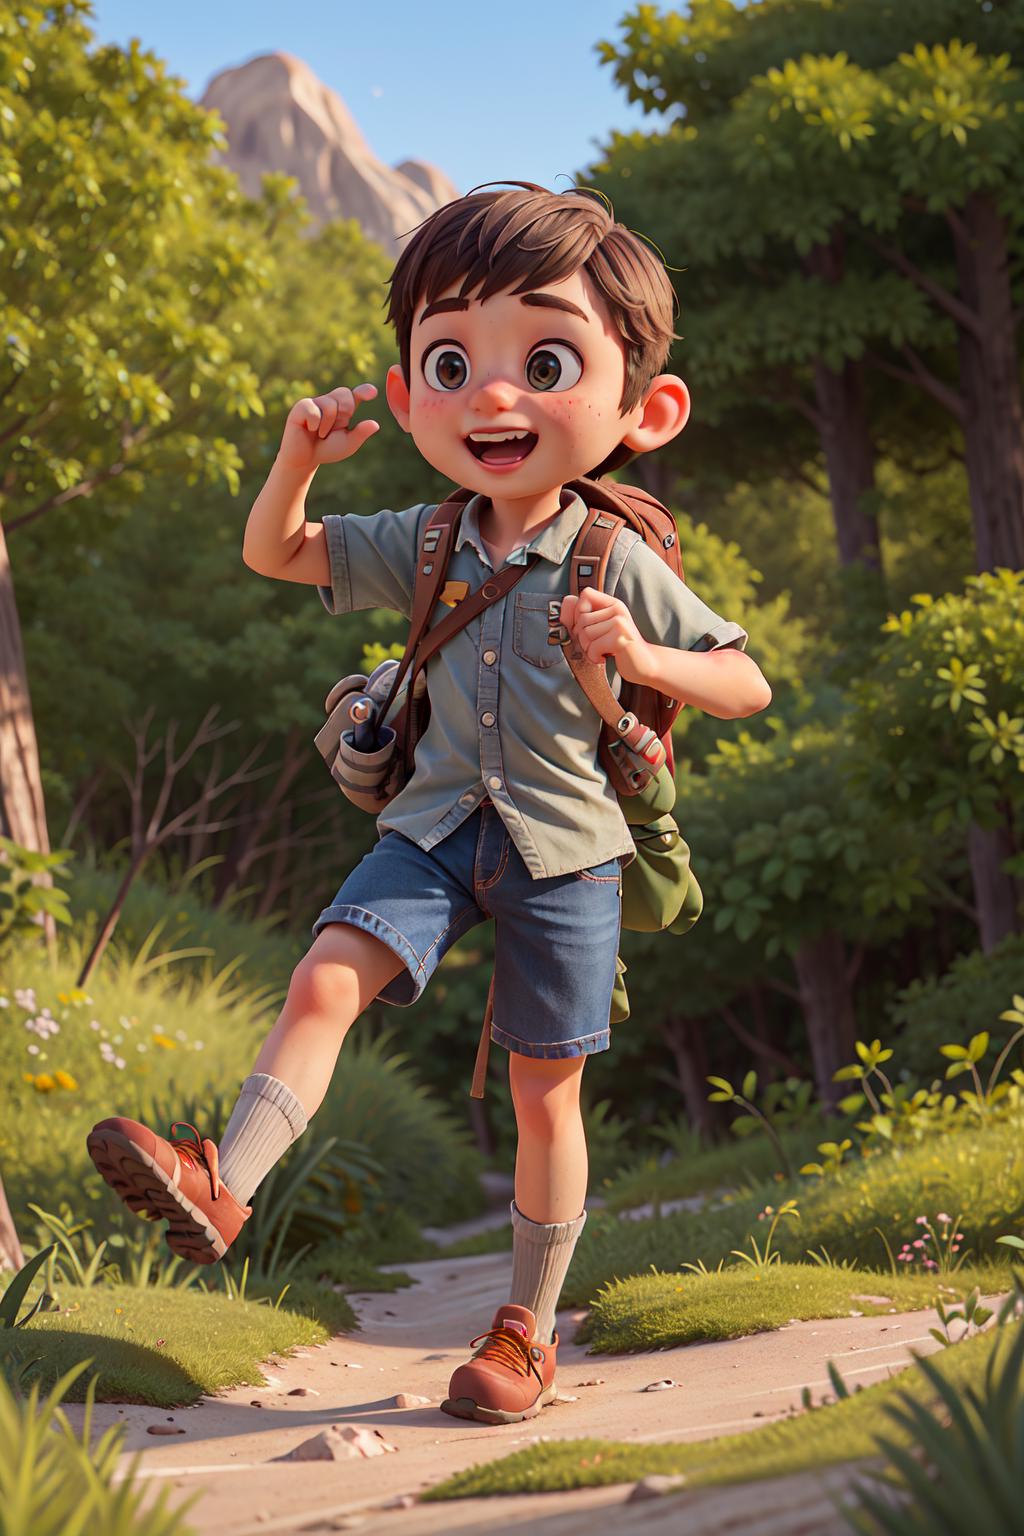 A happy boy wearing a backpack and shorts in a cartoon image.